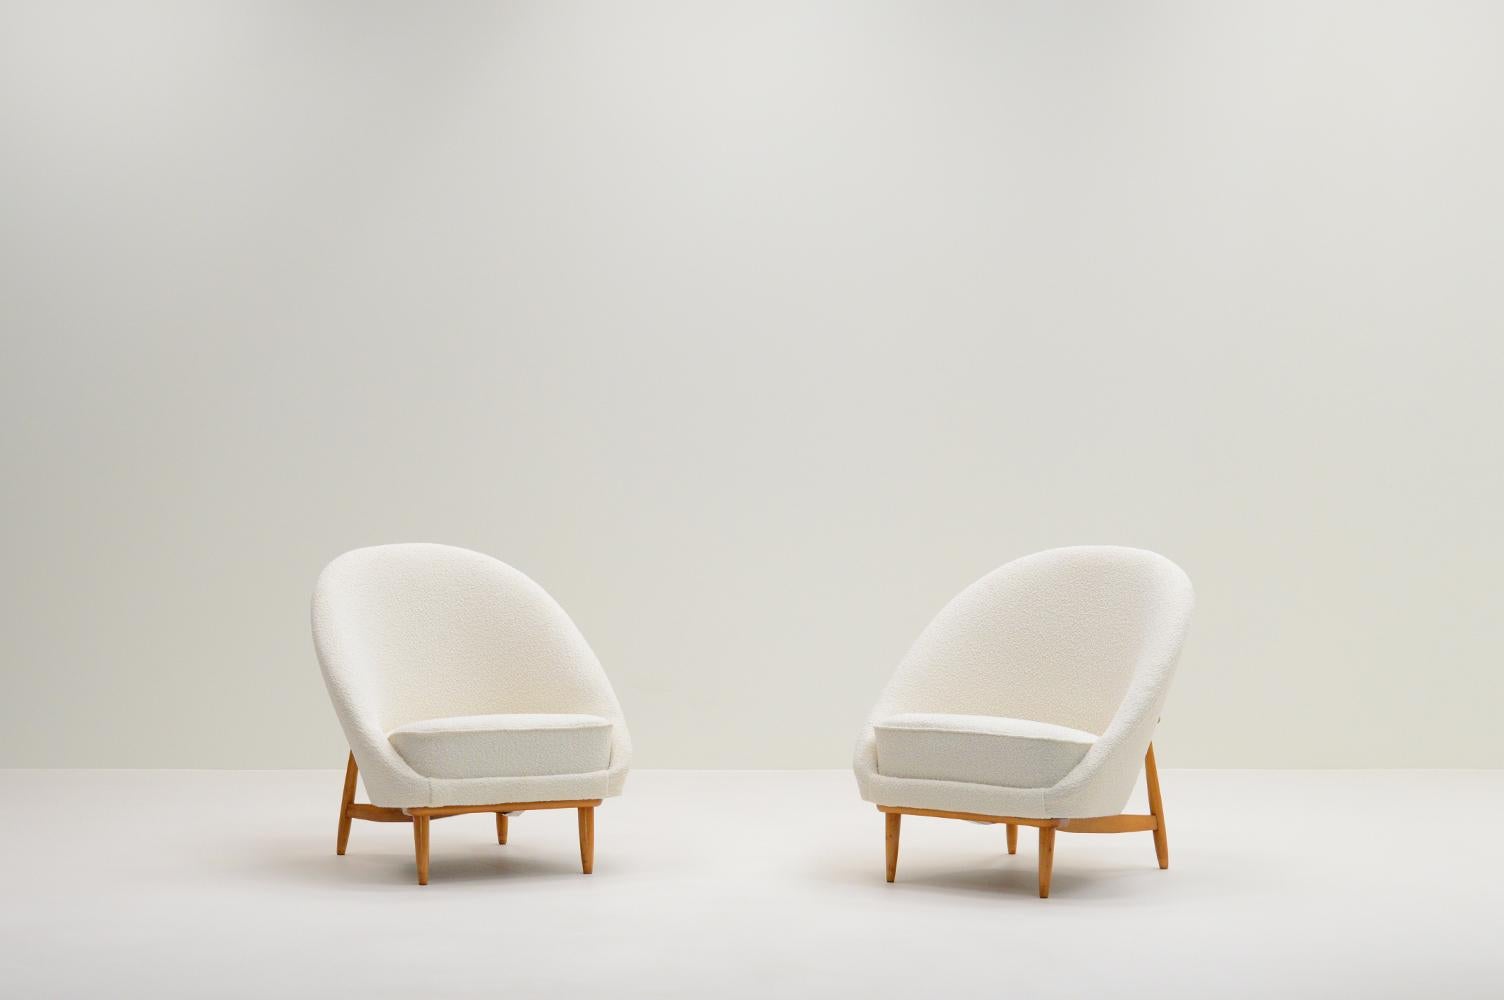 Mid-Century Modern Set of 2 model 115 chairs by Theo Ruth for Artifort, 1950s the Netherlands.